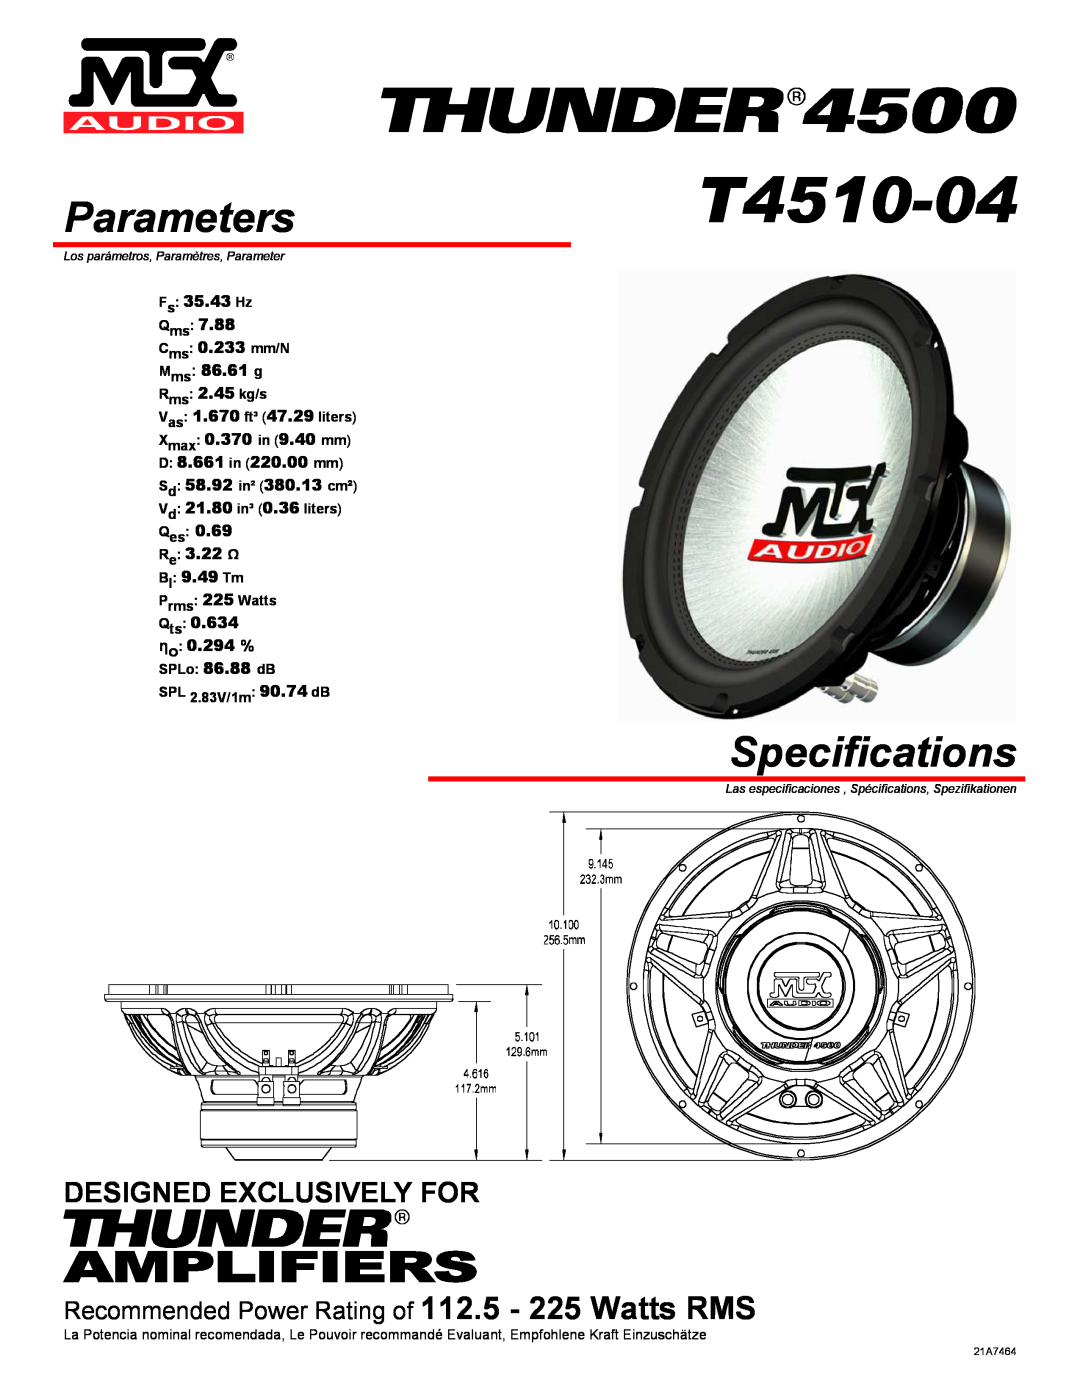 MTX Audio T4510-04 specifications Parameters, Specifications, Amplifiers, Designed Exclusively For, Fs 35.43 Hz Qms 